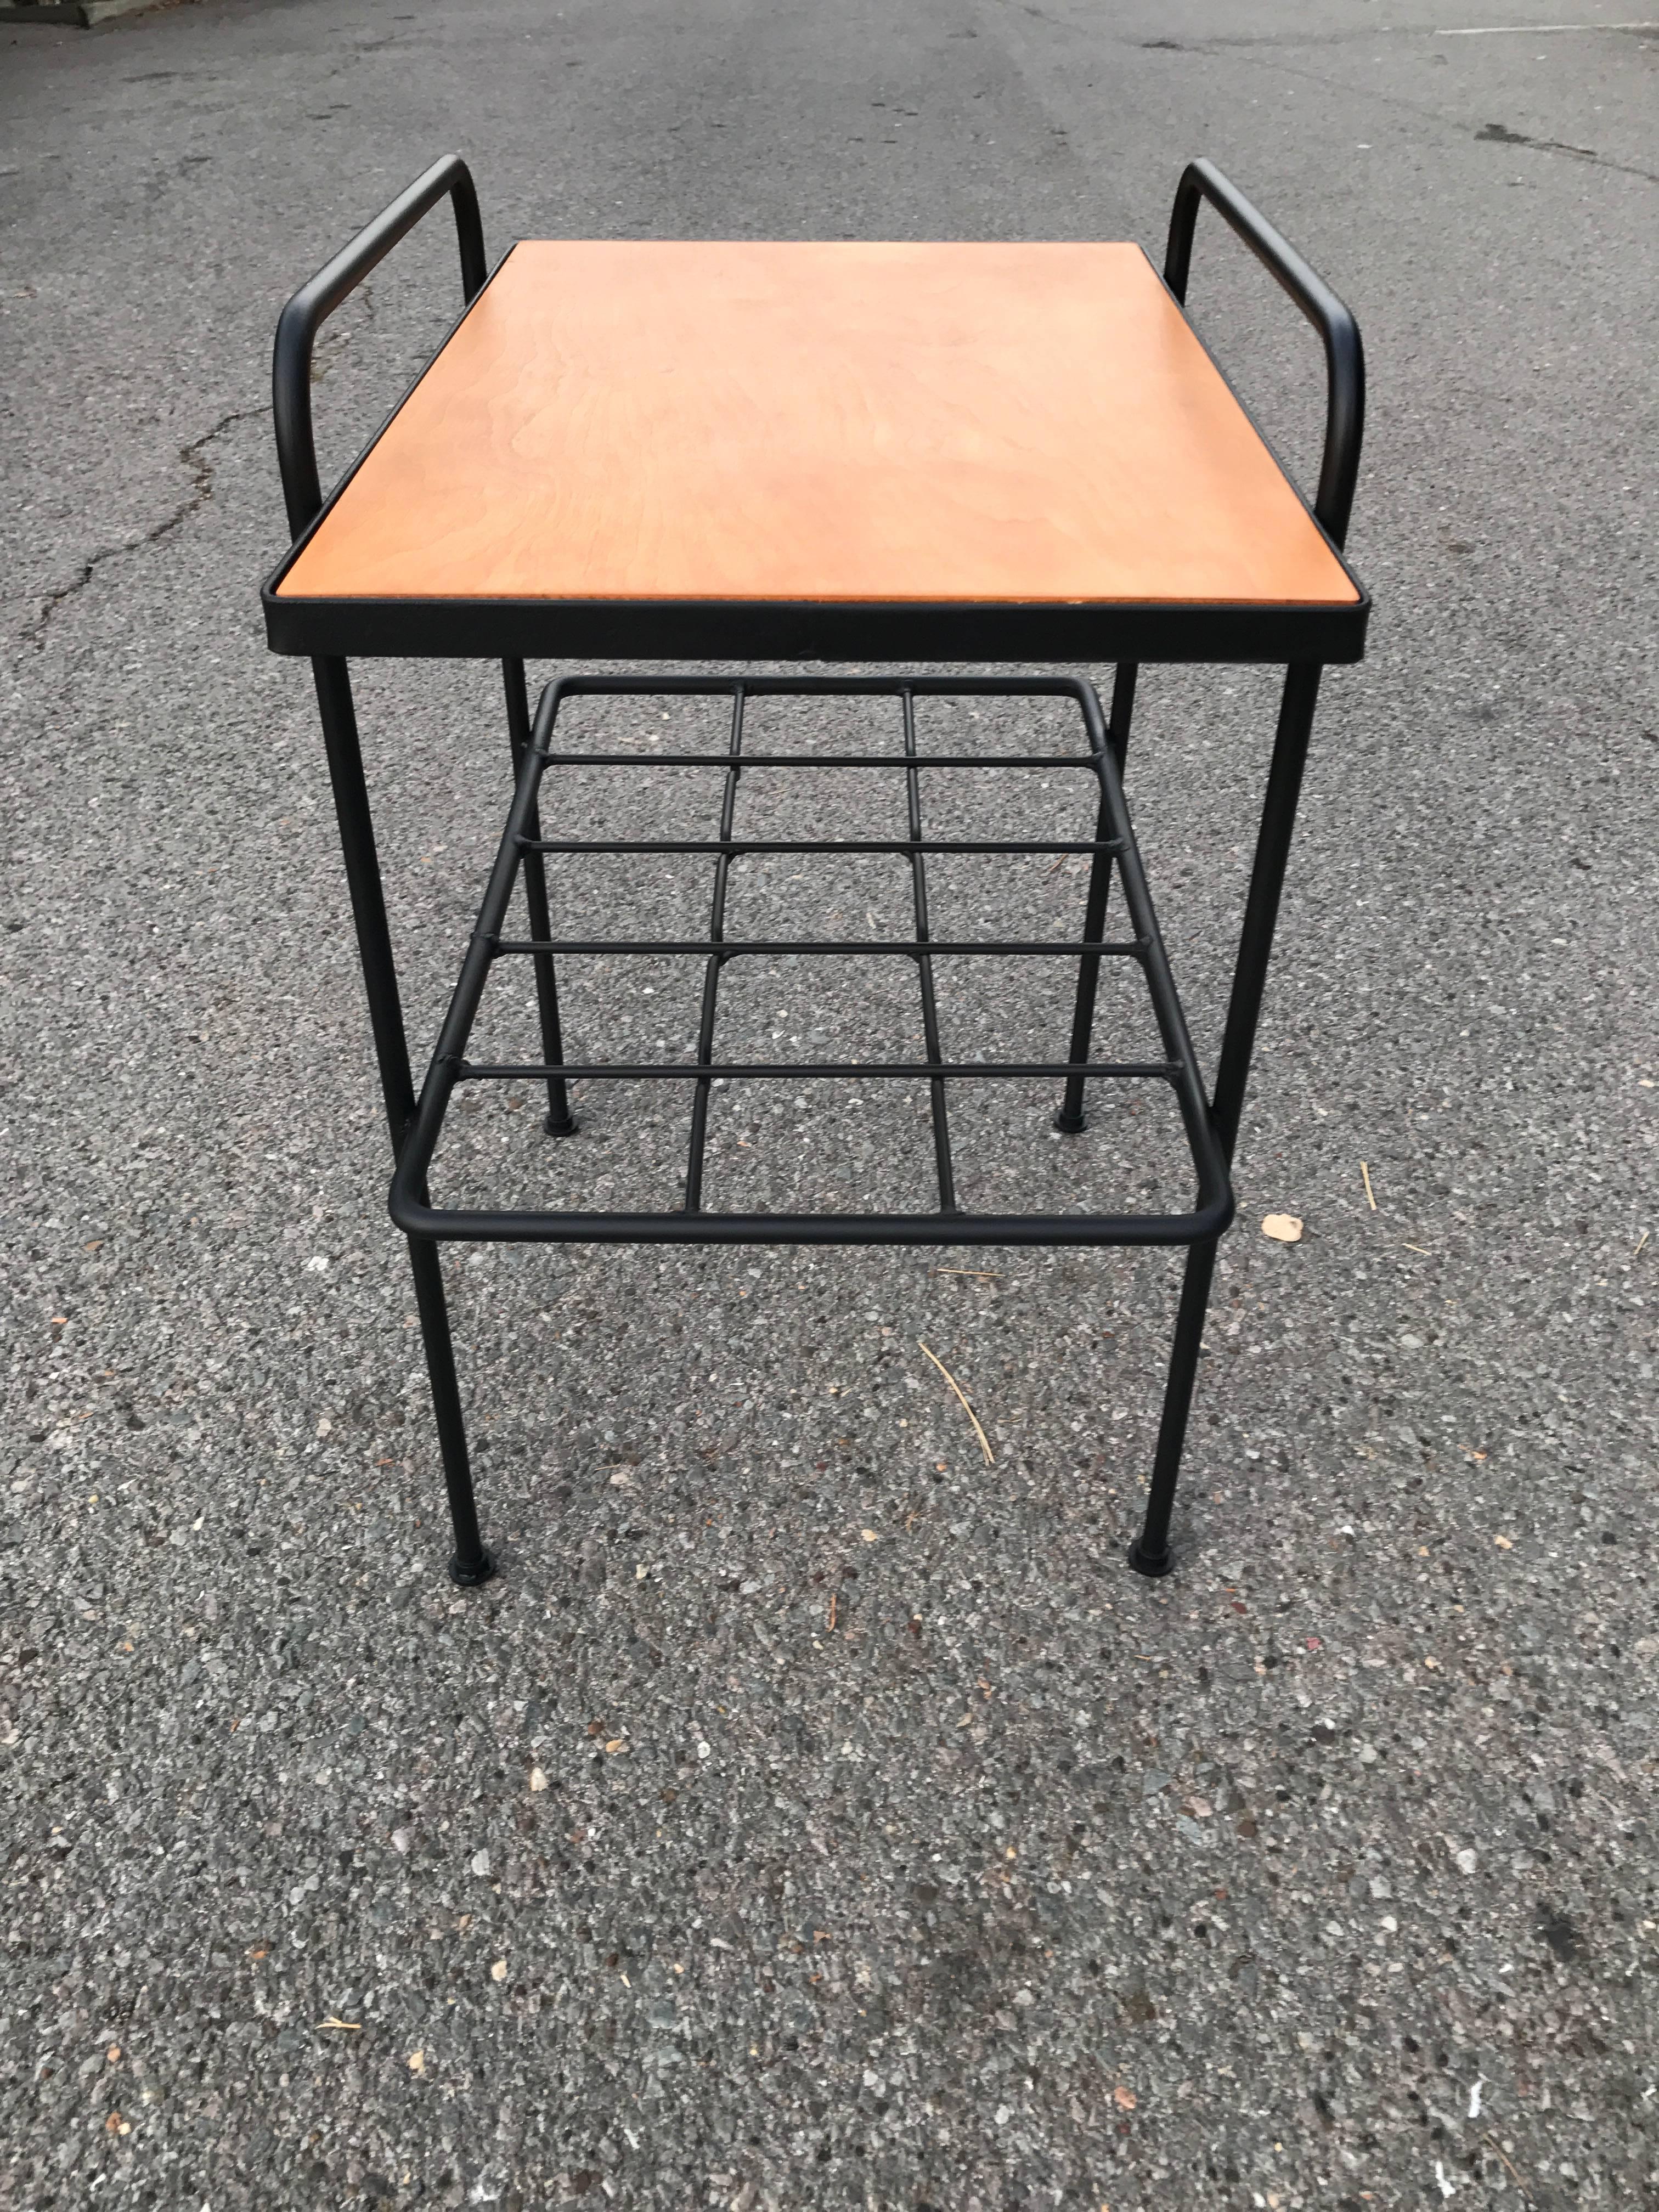 Mid-20th Century Inco Iron and Birch Side Table 1950s, California Design For Sale